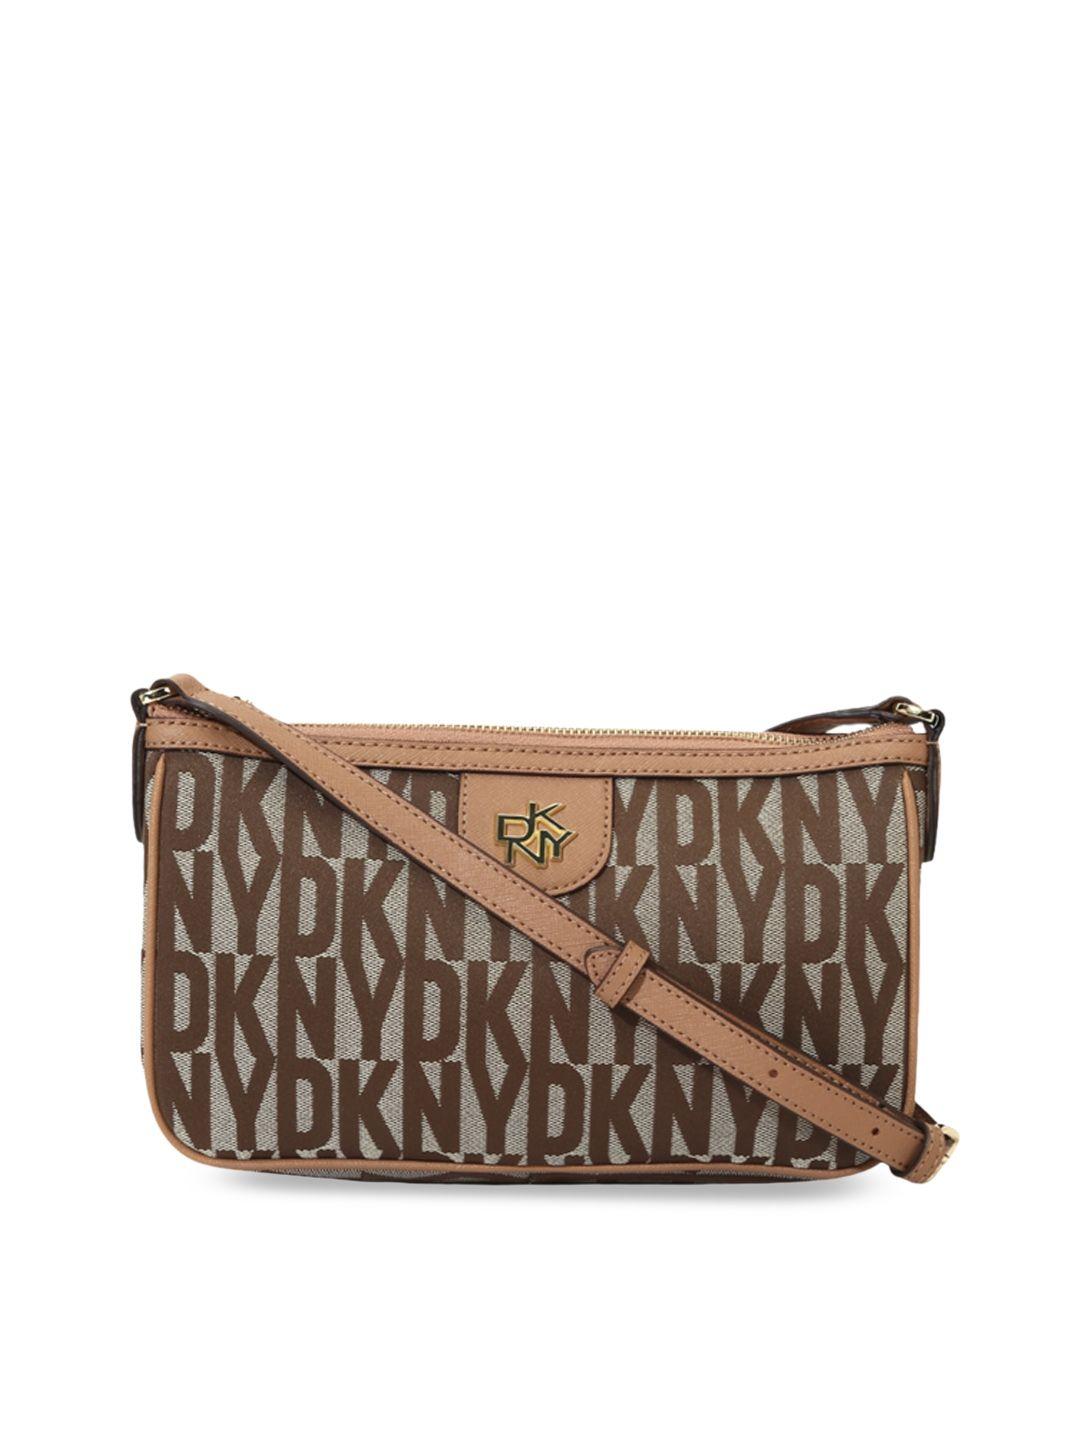 dkny typography printed jacquard with buckle details structured sling bag